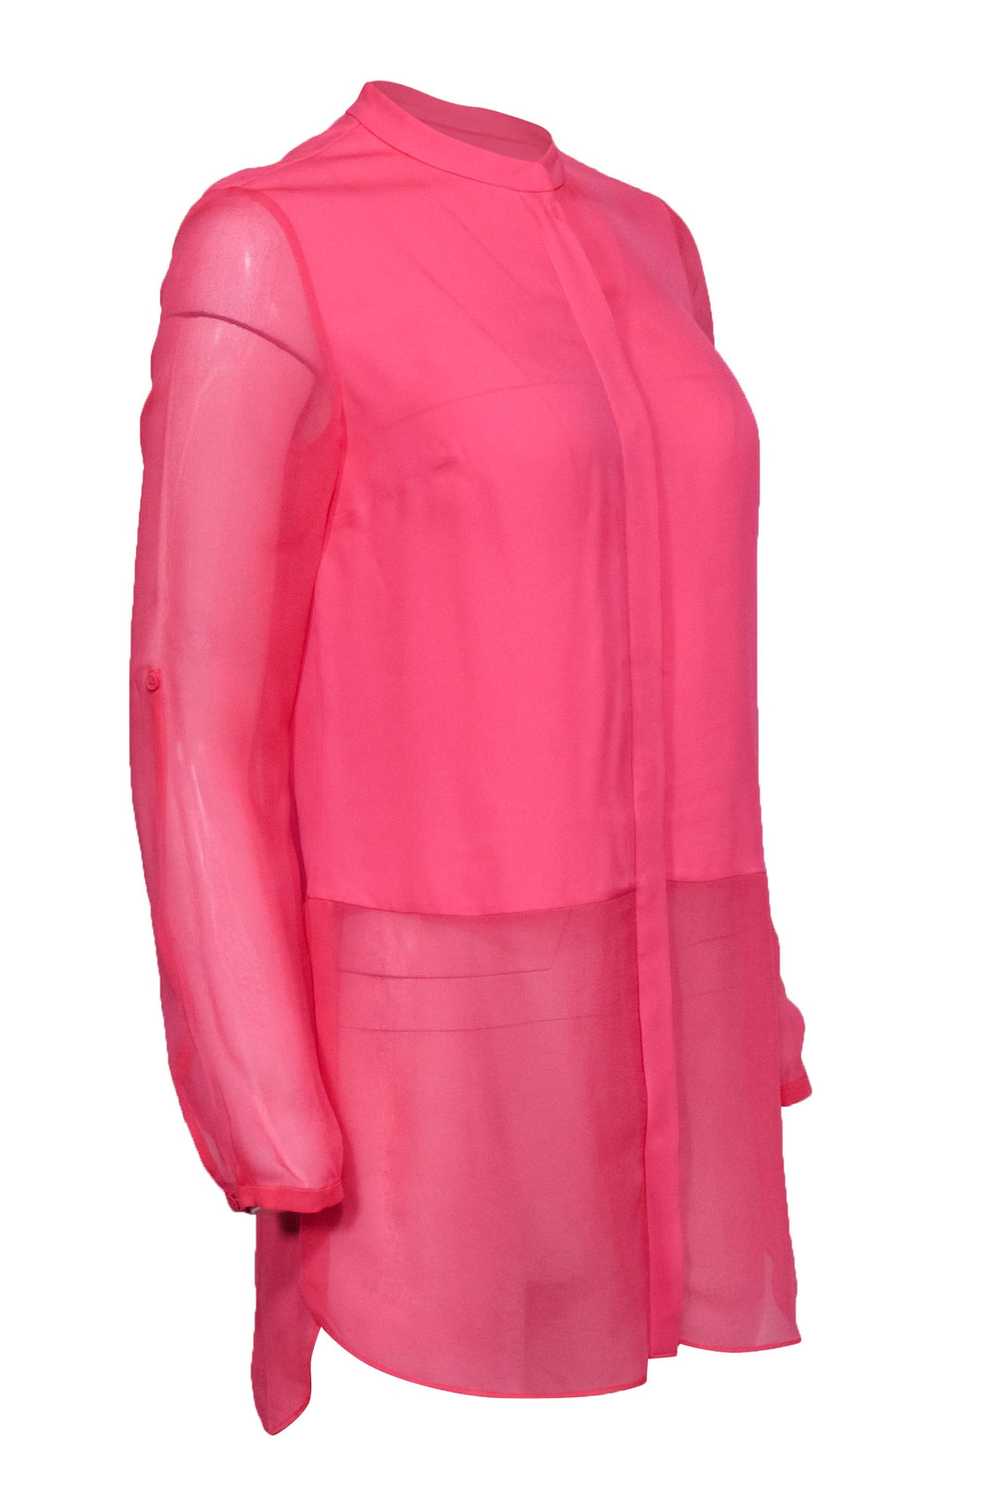 Elie Tahari - Hot Pink Button-Up Silk Blouse w/ S… - image 2